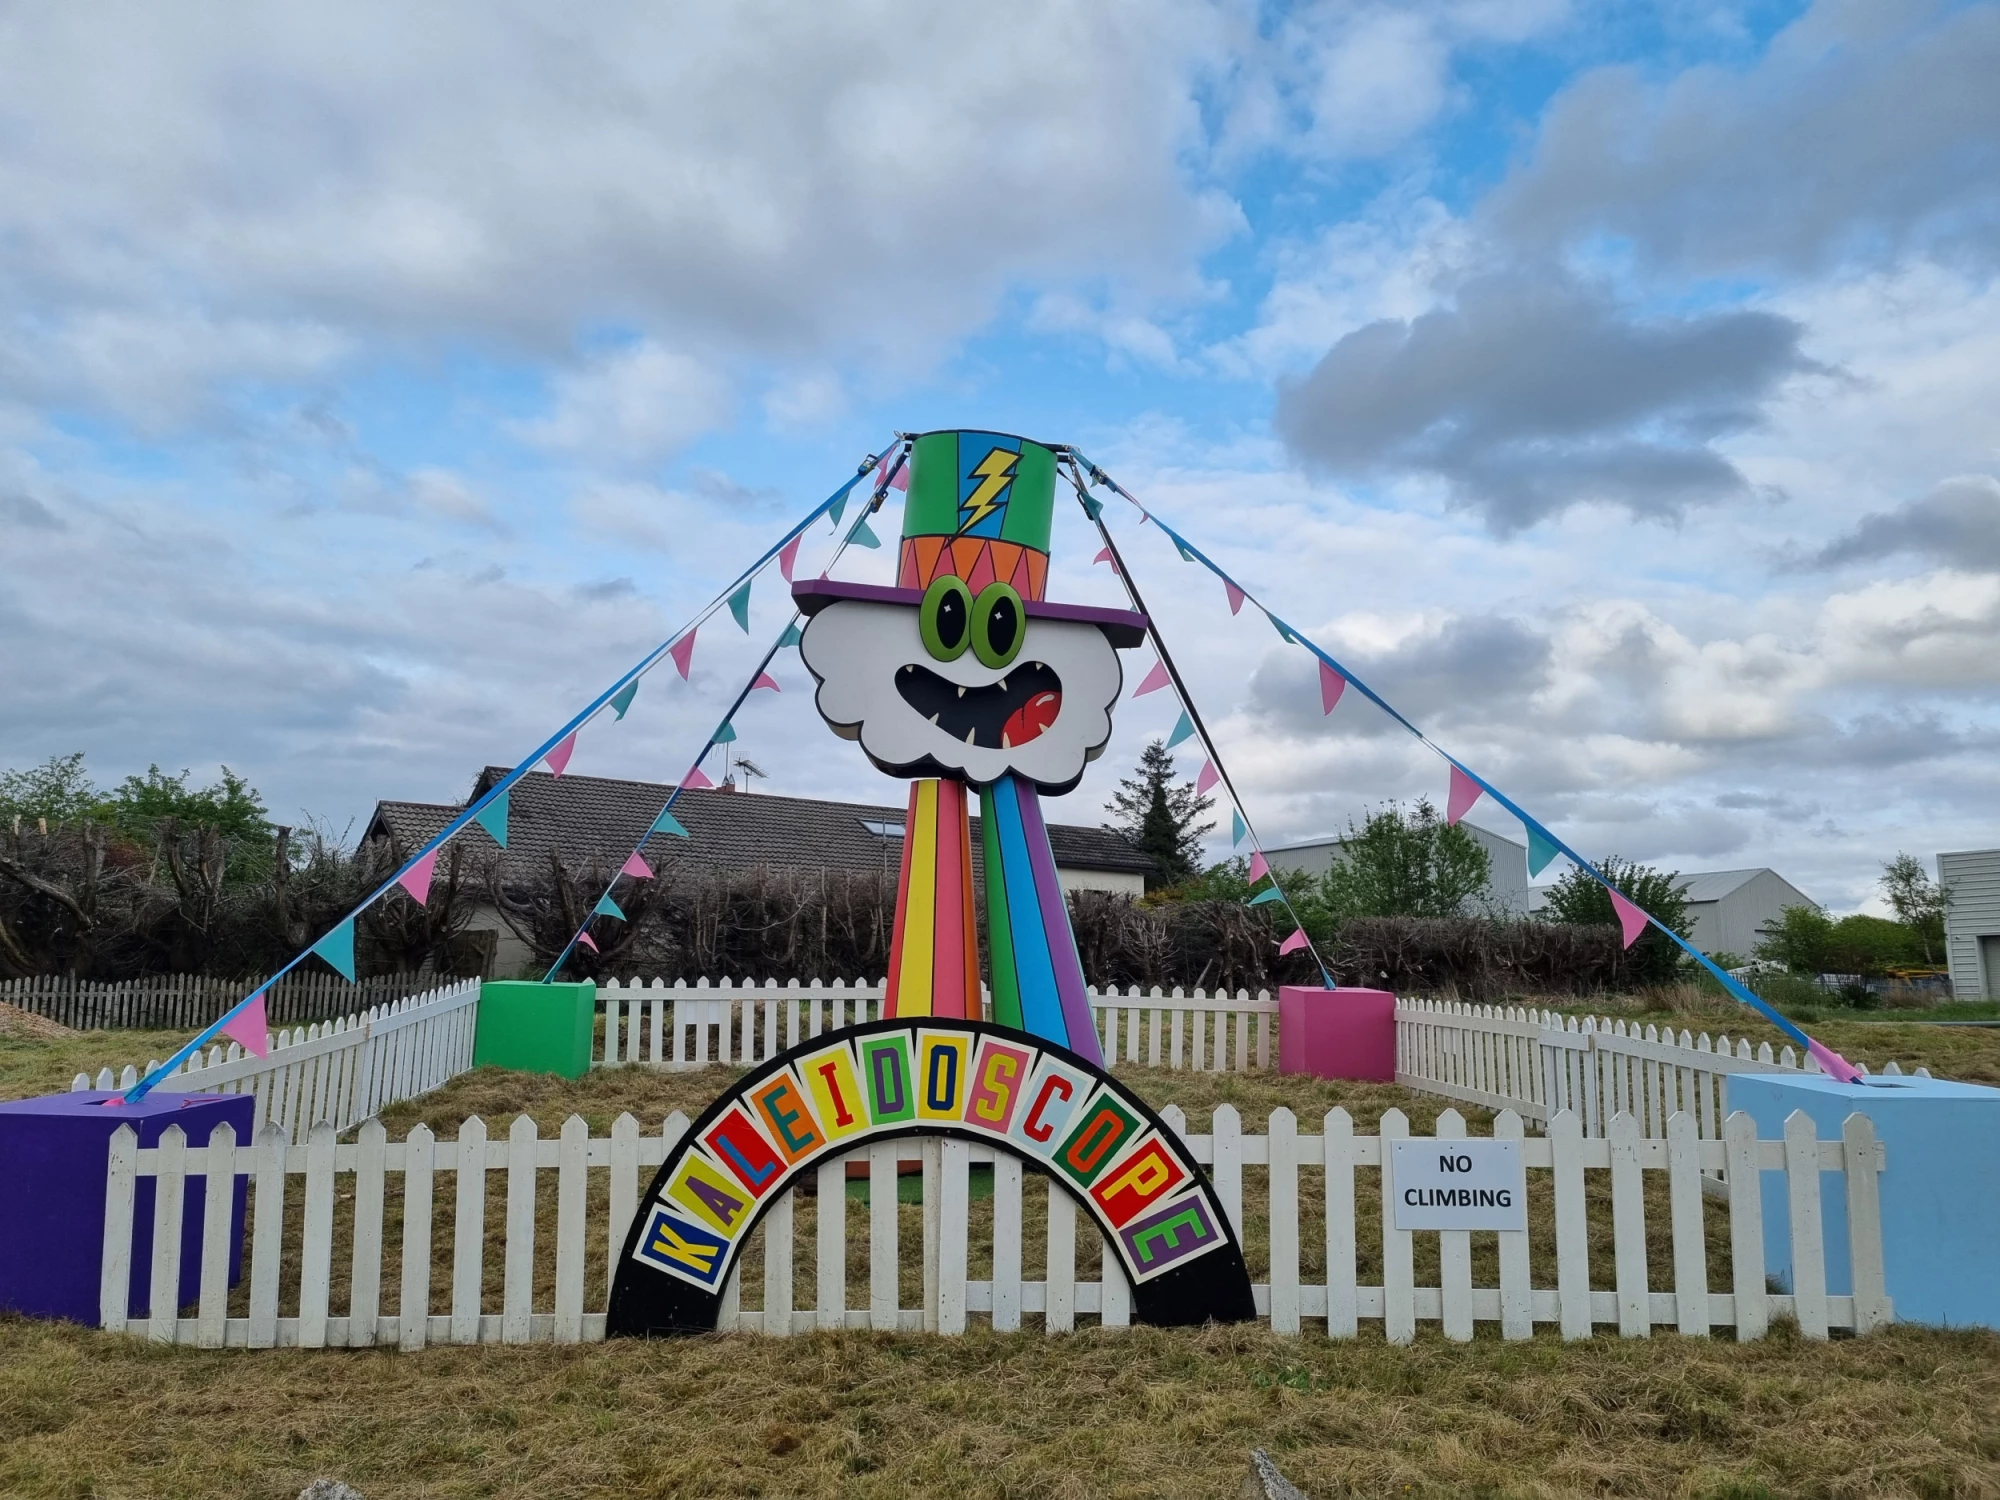 Large-scale colourful sculpture in a fenced area with bunting. 